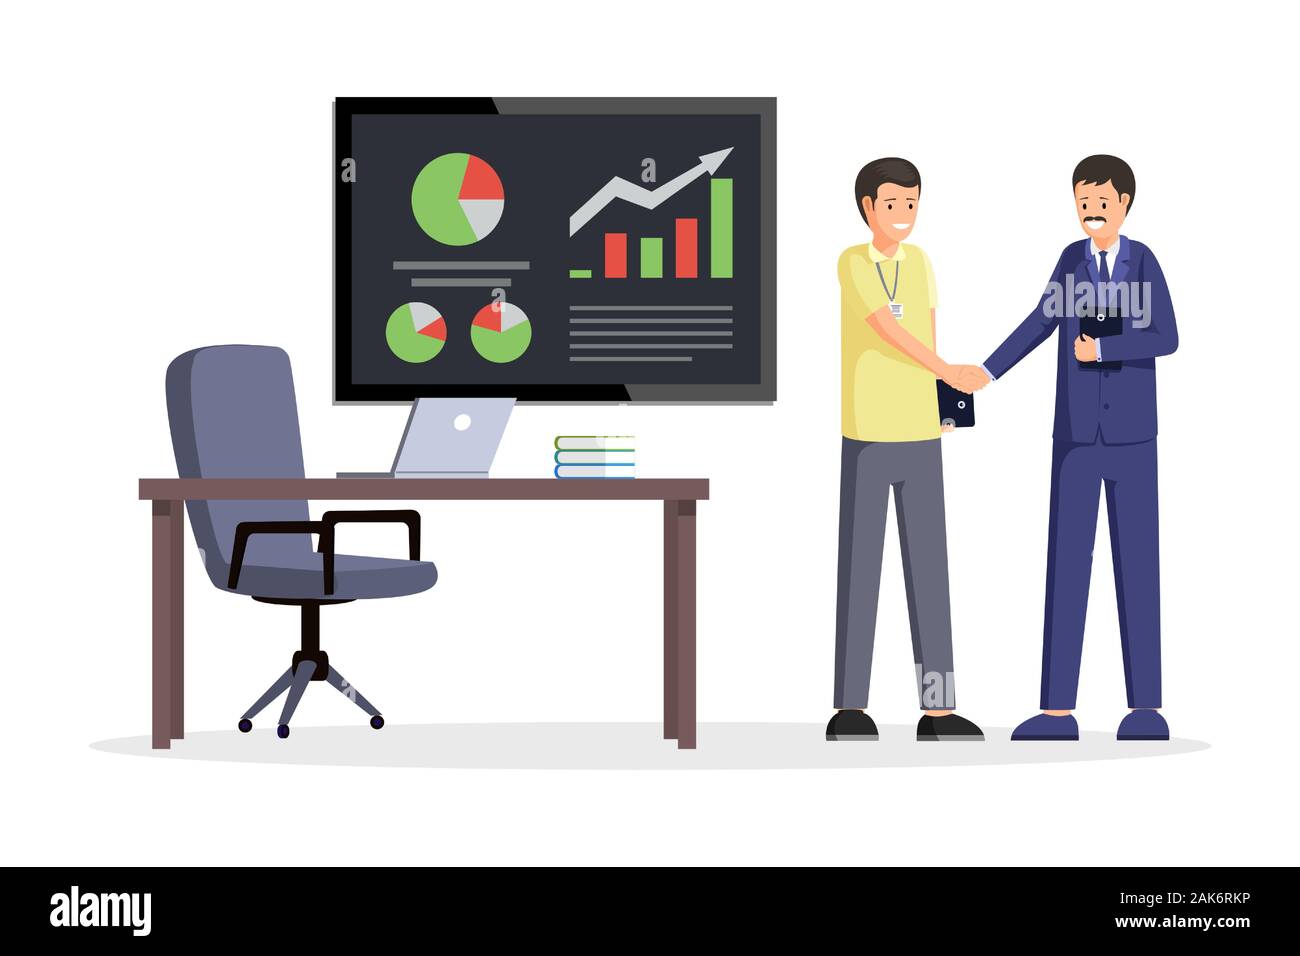 Business partners shaking hands vector illustration. Office interior with desk, laptop and board with charts. Business strategy negotiations, agreement, businessmen successful partnership concept Stock Vector